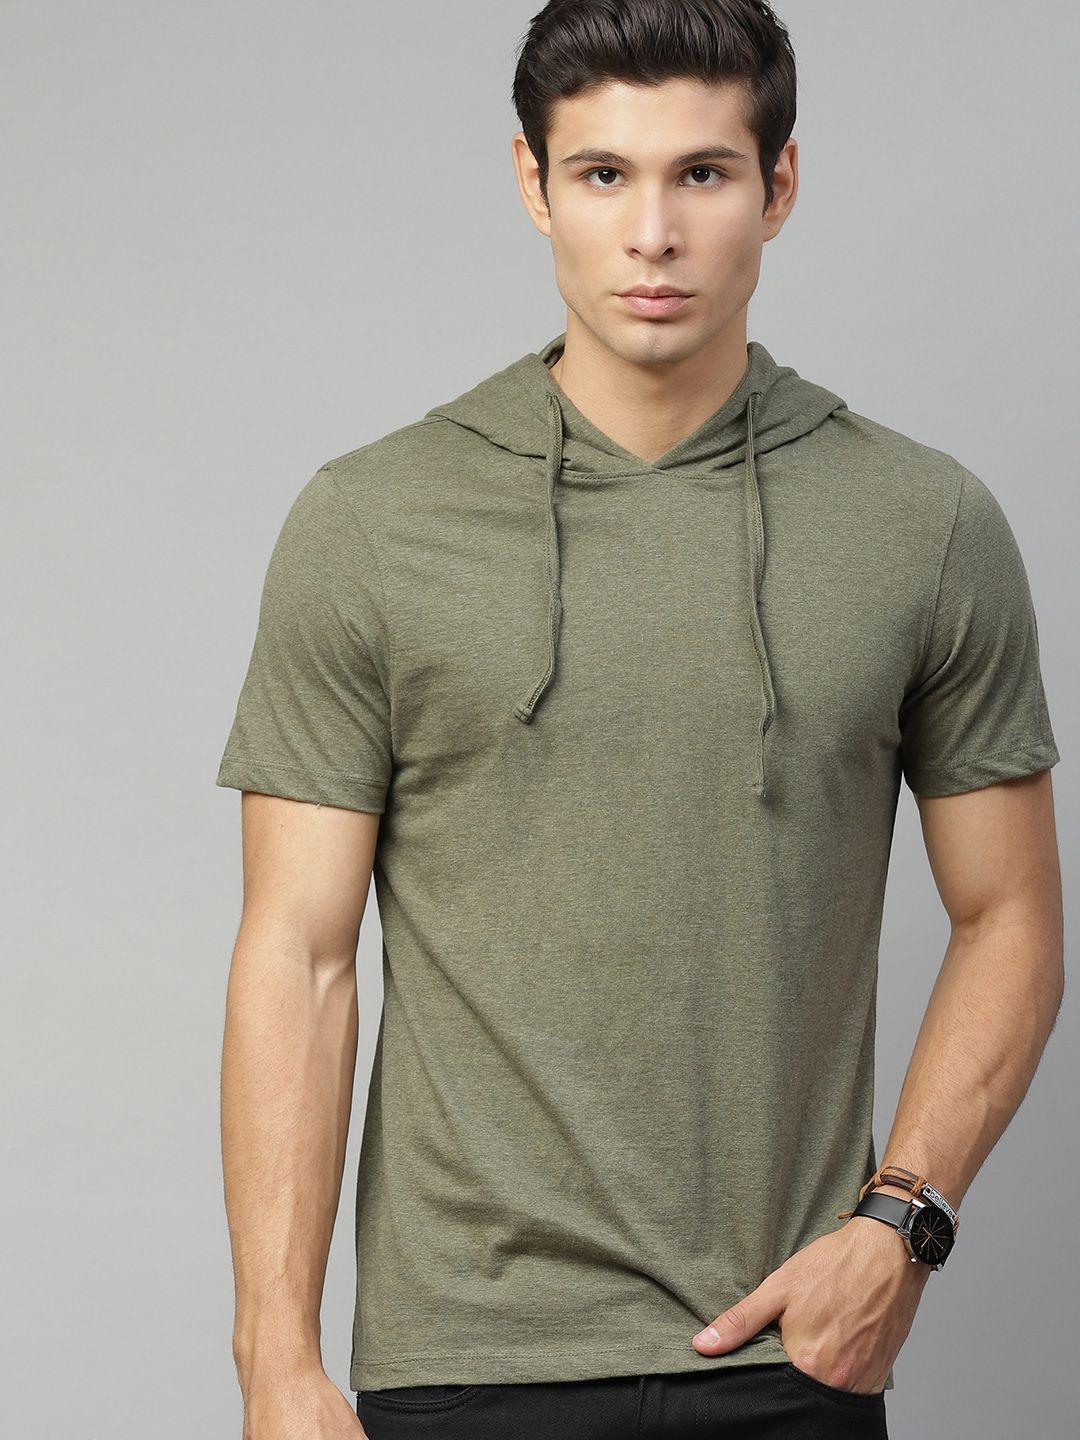 the roadster lifestyle co men olive green solid pure cotton t-shirt